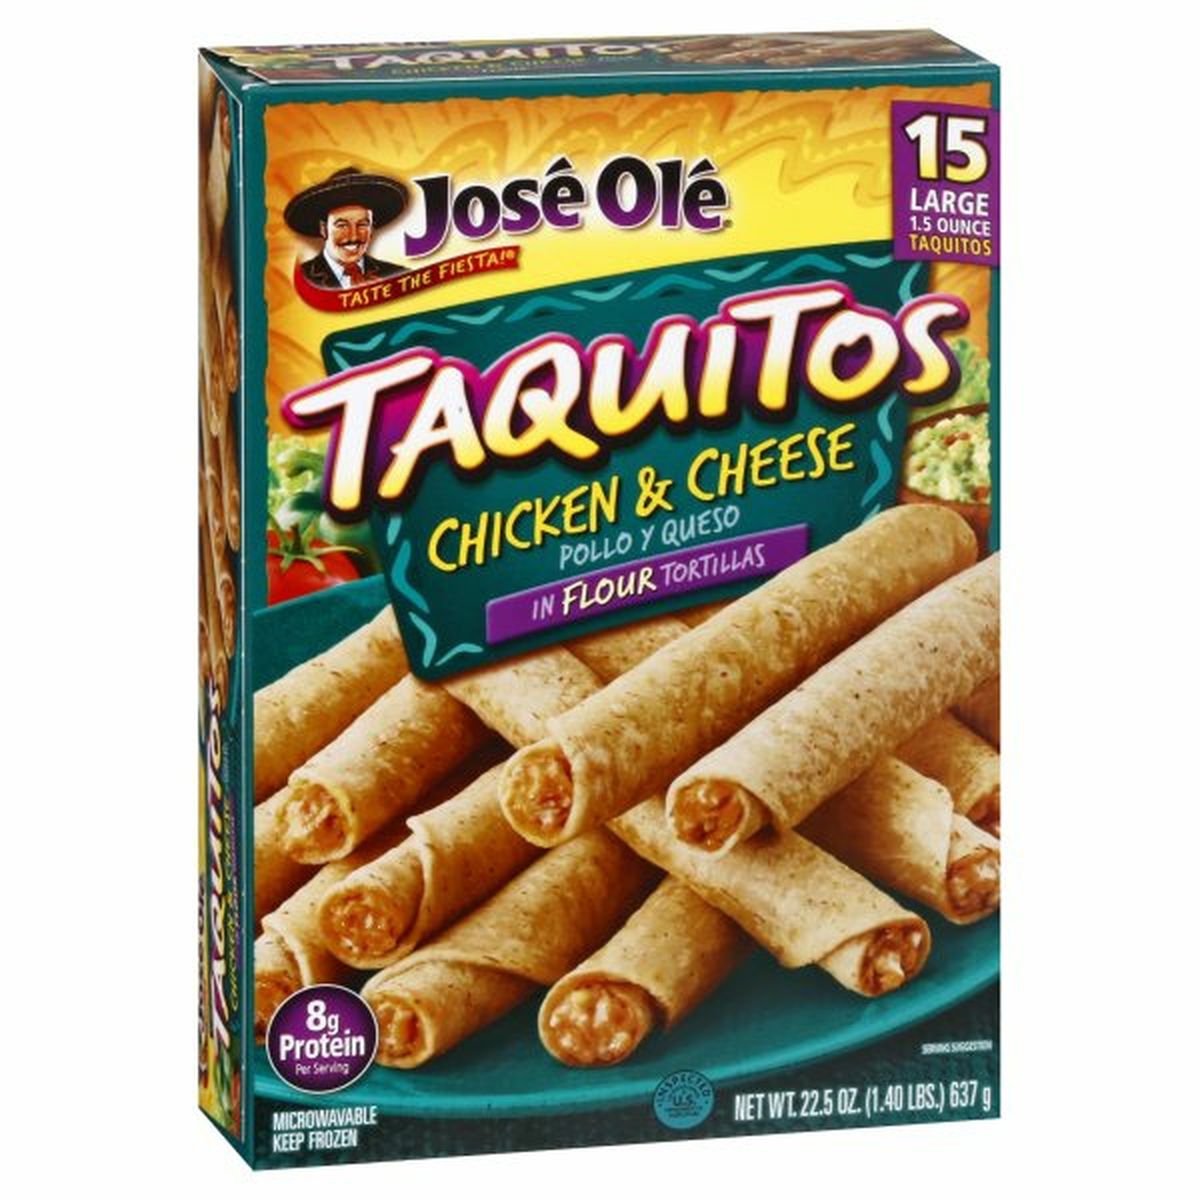 Calories in JosÃ© OlÃ© Taquitos, Chicken & Cheese